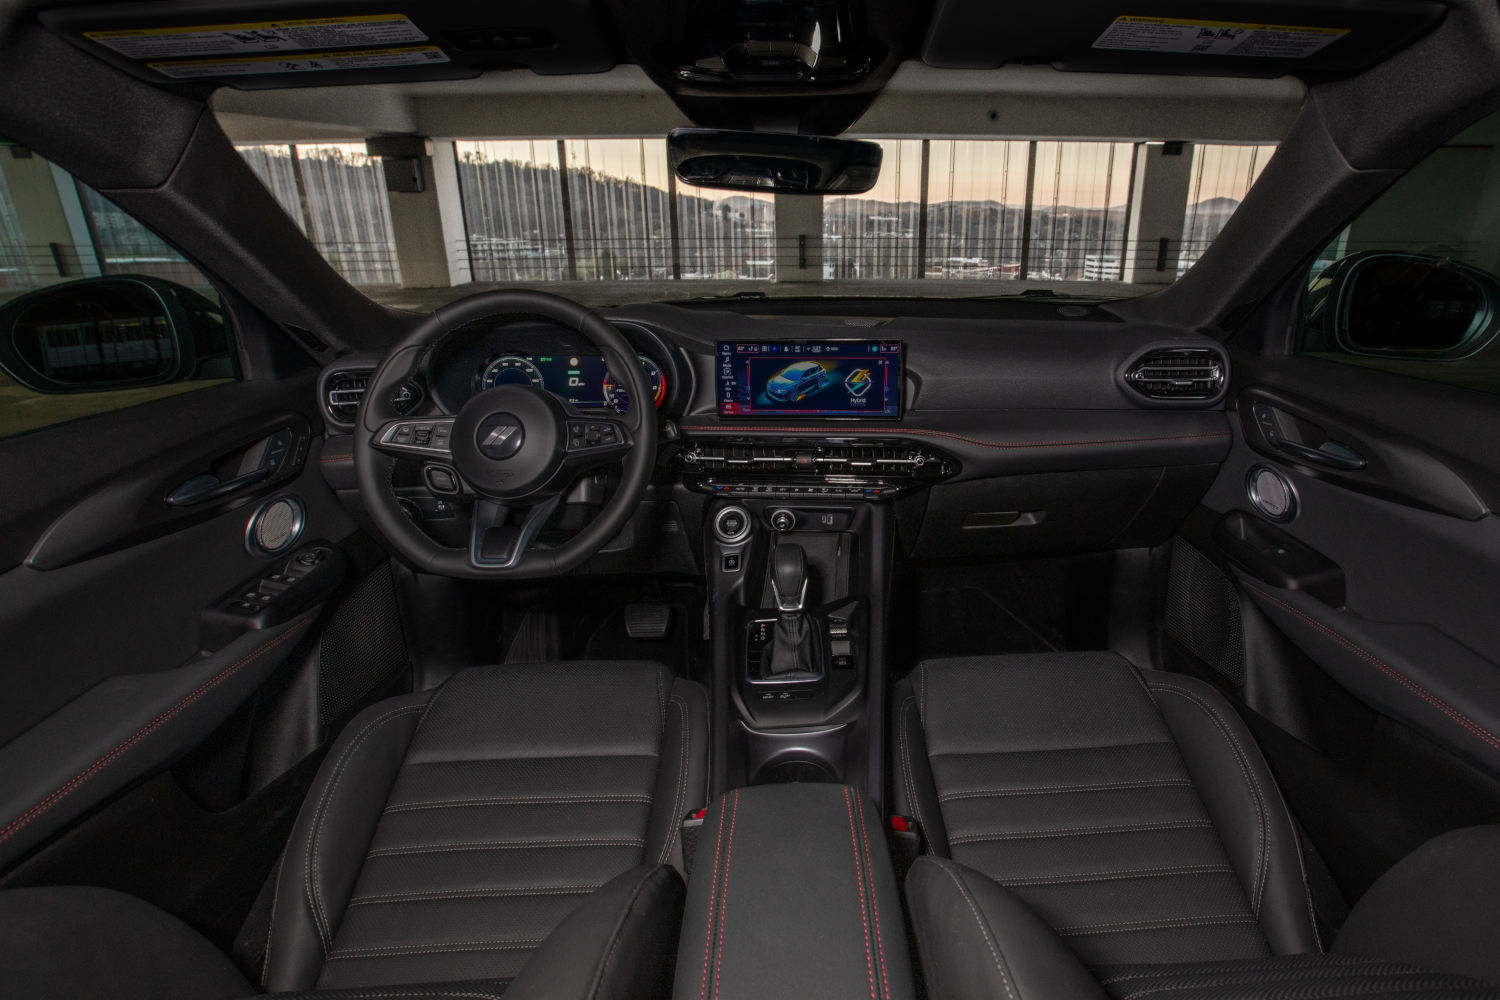 Inside the Dodge Hornet compact SUV